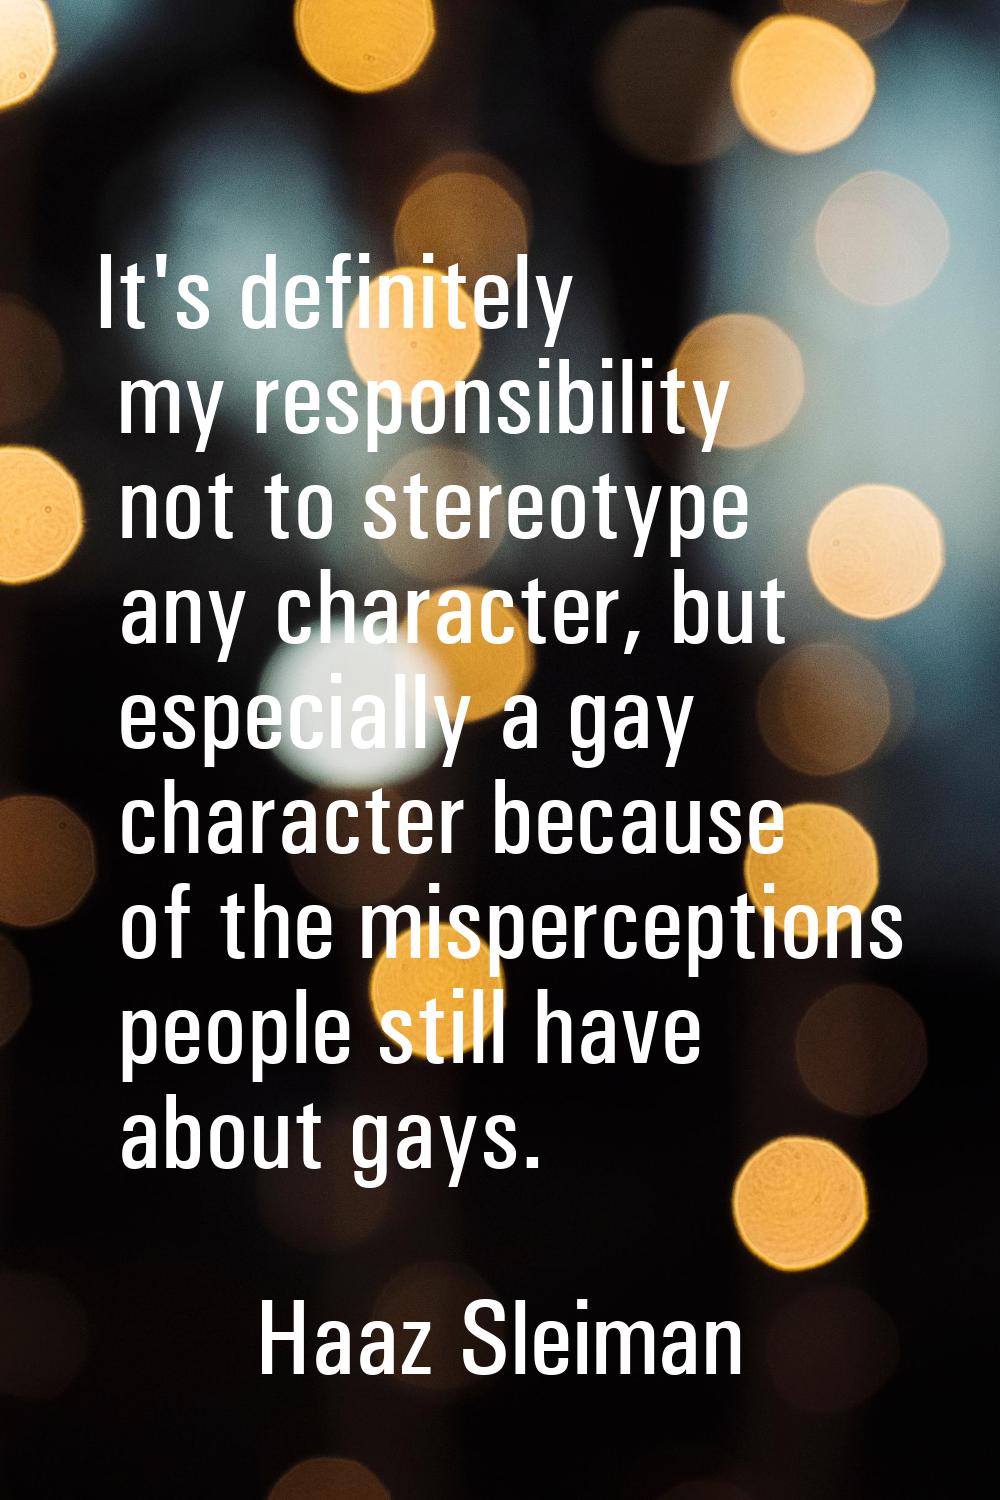 It's definitely my responsibility not to stereotype any character, but especially a gay character b